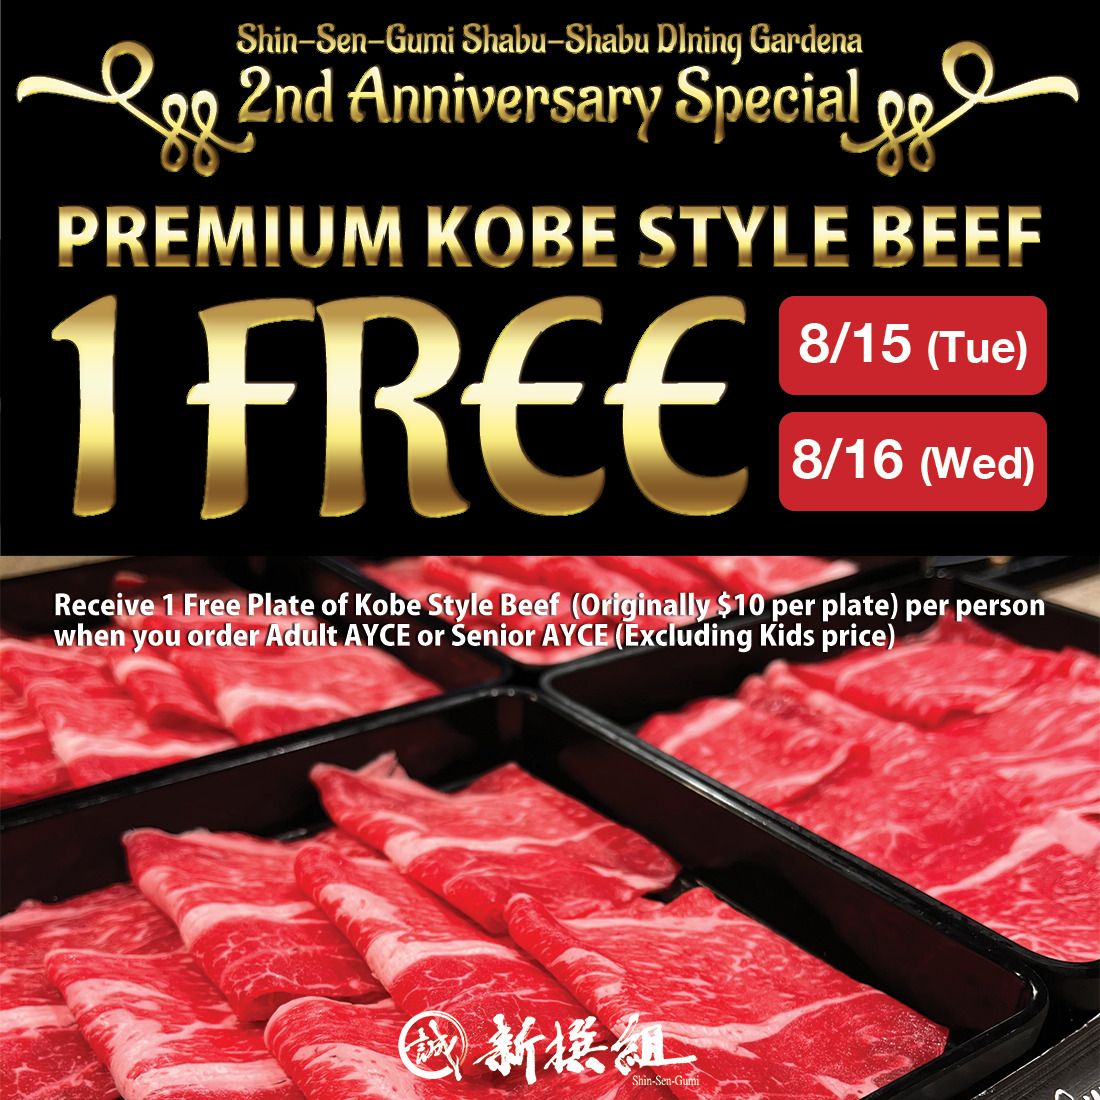 Photo of a plate of PREMIUM KOBE STYLE BEEF on a black background. "Shin-Sen-Gumi Shabu-Shabu Dining Gardena 2nd Anniversary / PREMIUM KOBE STYLE BEEF 1 FREE" is written in gold letters, and "8/15 (Tue) & 8/16 (Wed)" is written in a red rectangle. Above the photo is written in white letters "Receive 1 Free Plate of Kobe Style Beef (Originally $10 per plate) per person when you order Adult AYCE or Senior AYCE (Excluding Kids price)'', and there is a SSG's logo at the bottom.